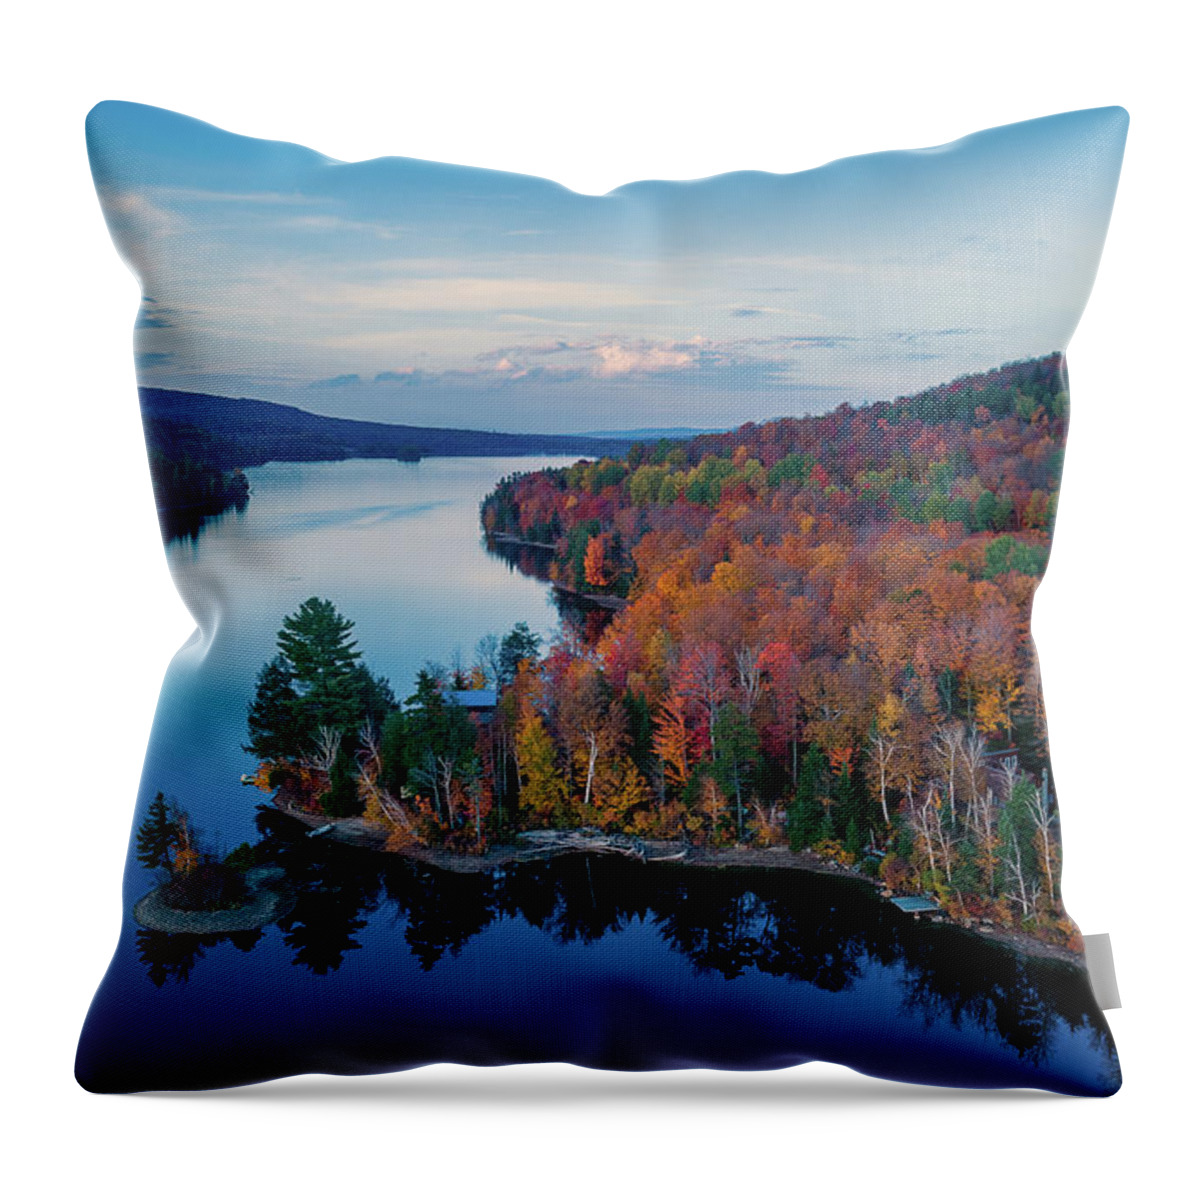 Norton Pond Throw Pillow featuring the photograph Norton Pond Vermont by John Rowe